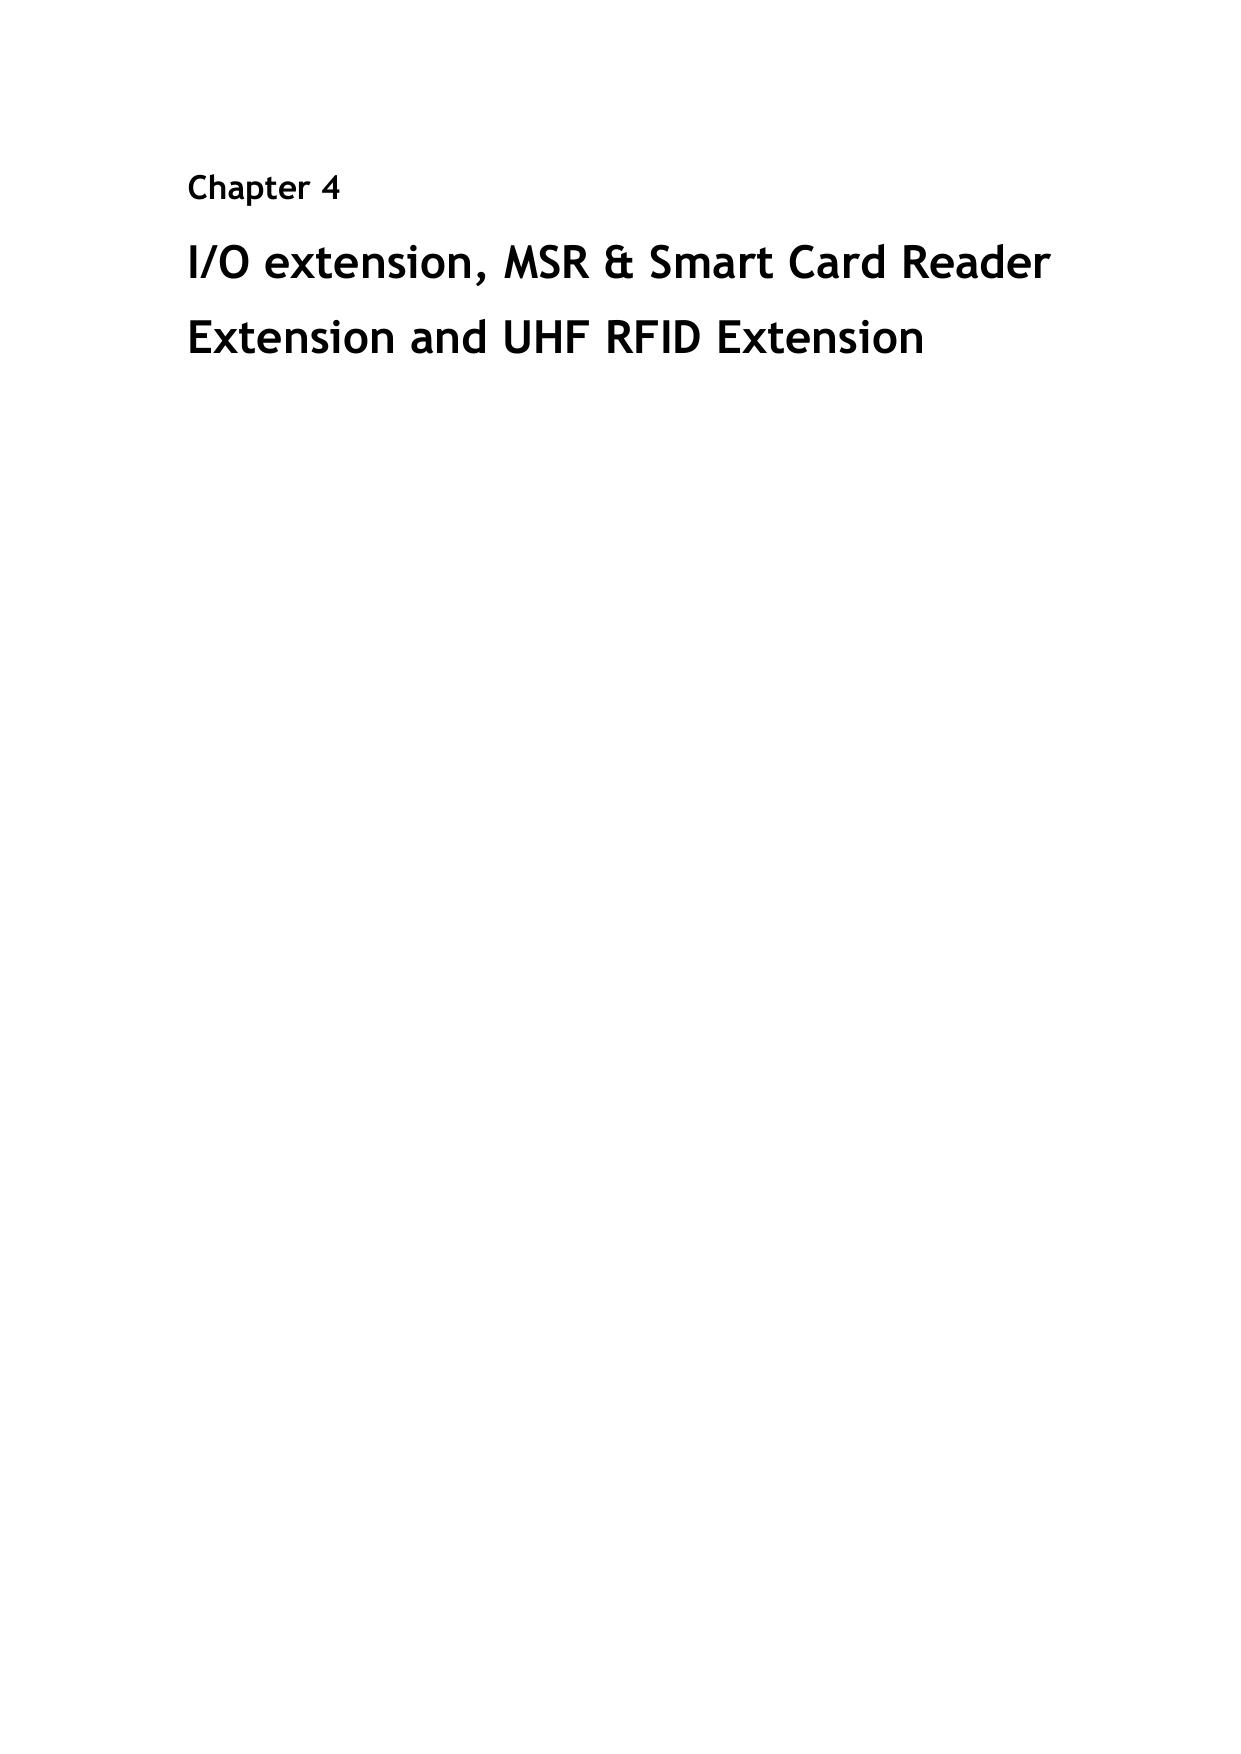 Chapter 4 I/O extension, MSR &amp; Smart Card Reader Extension and UHF RFID Extension    